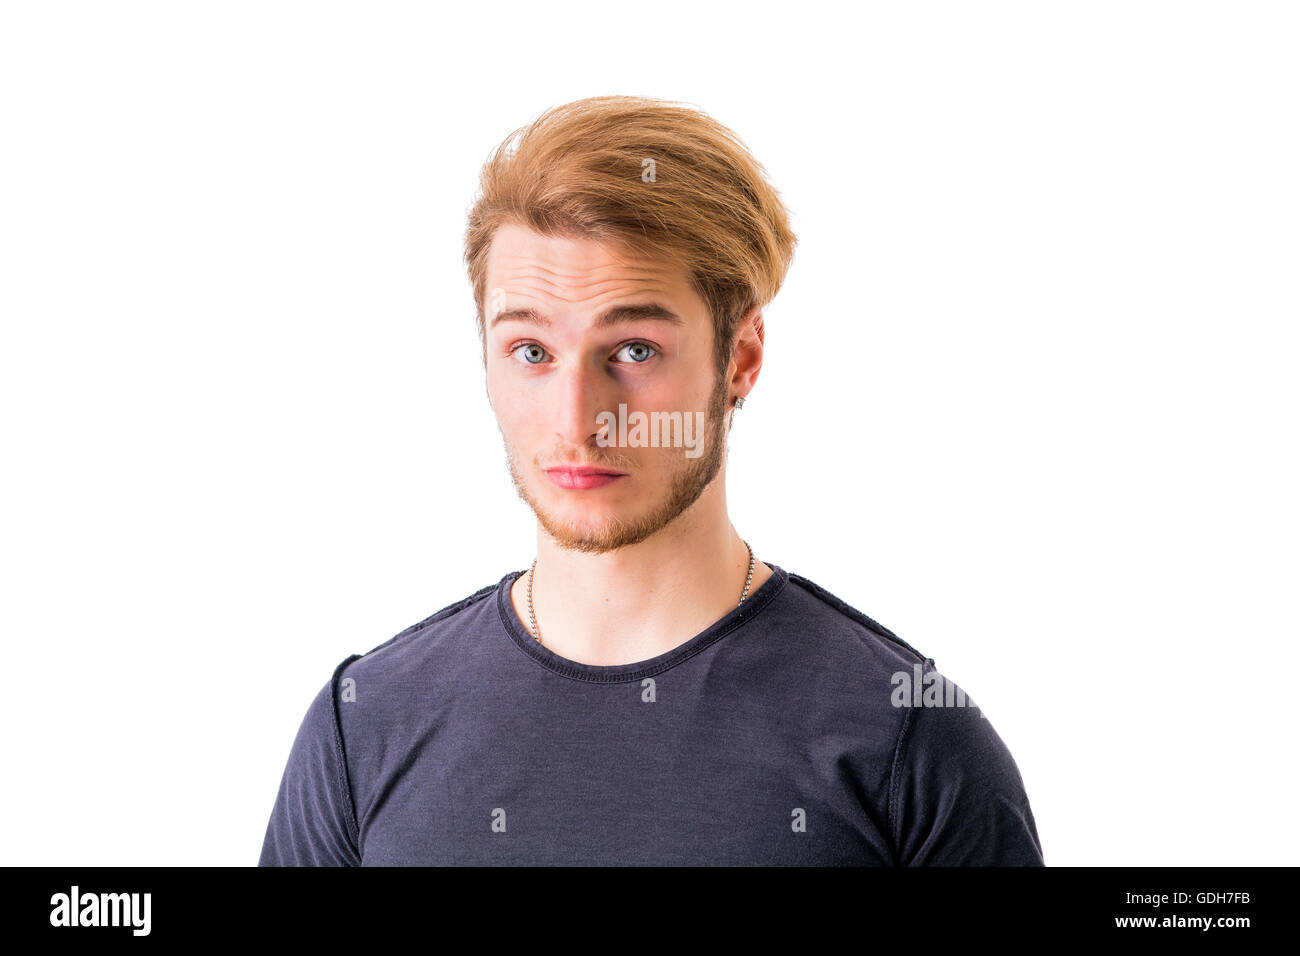 Sad or worried handsome young man looking down, isolated on white Stock Photo